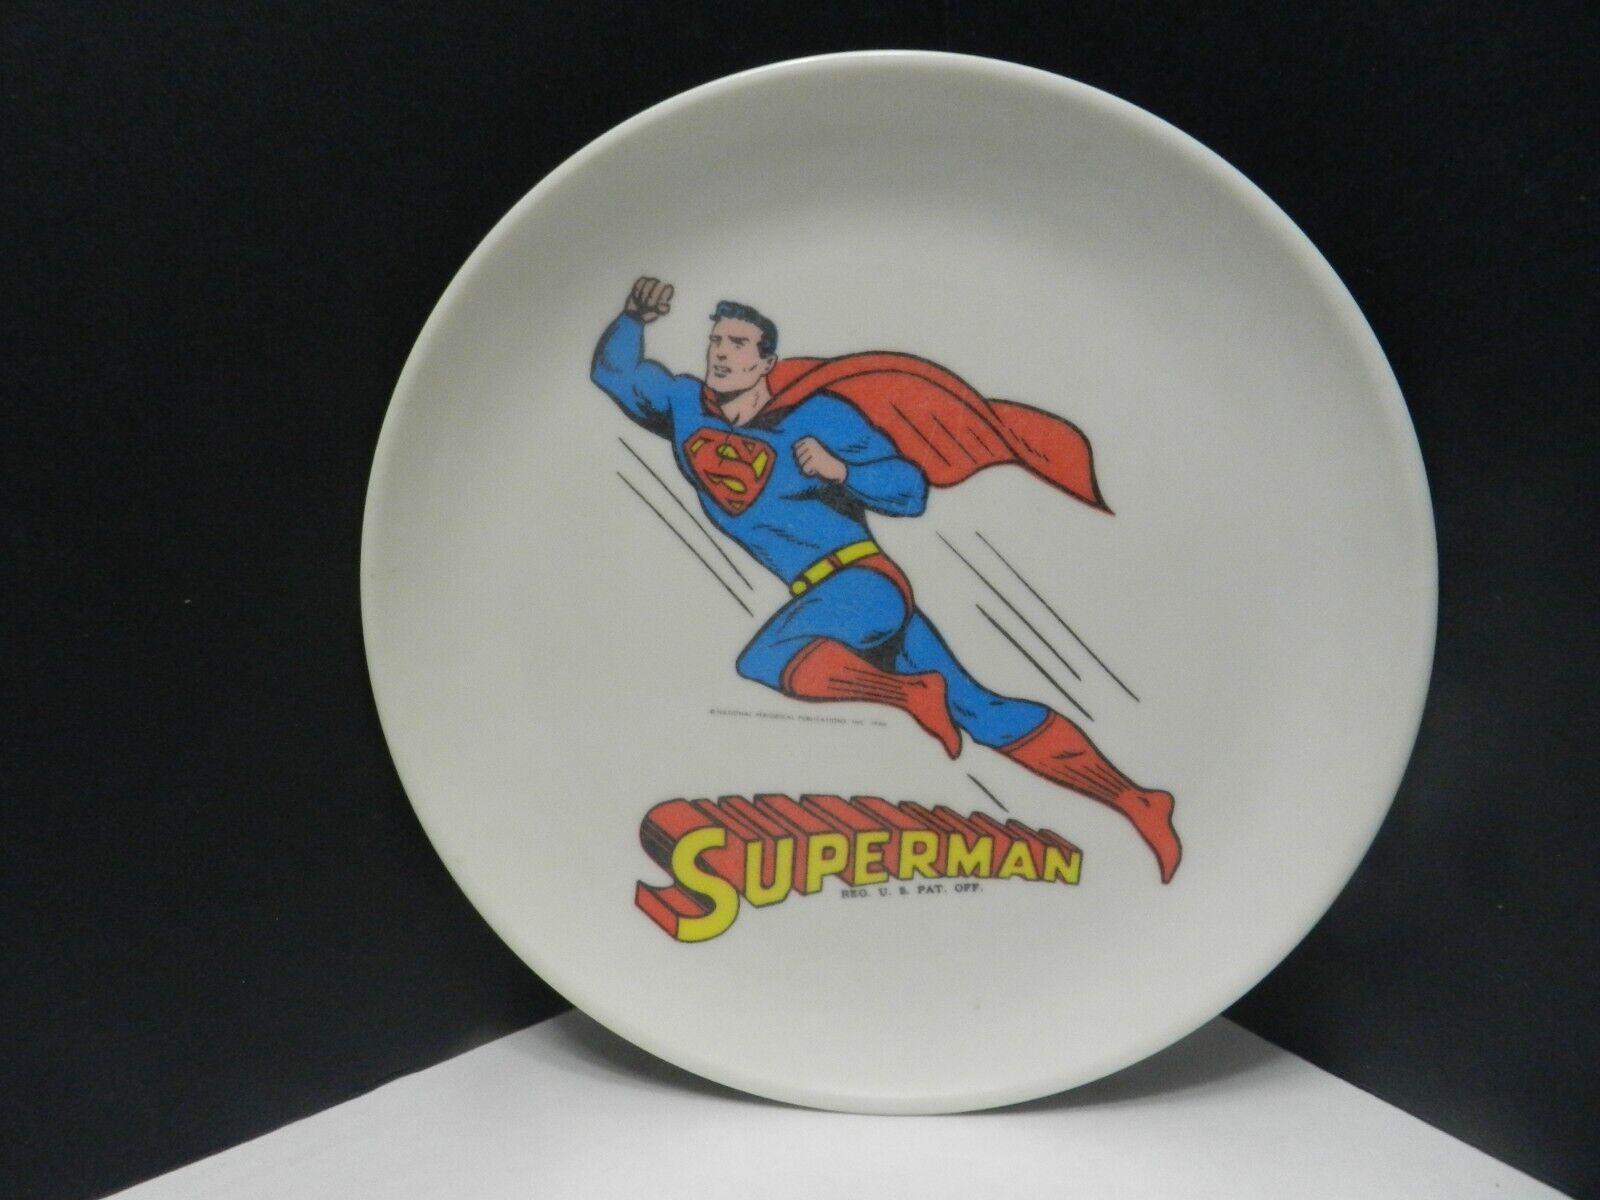 Vintage 1966 DC Superman plate  by National Periodical Publications 